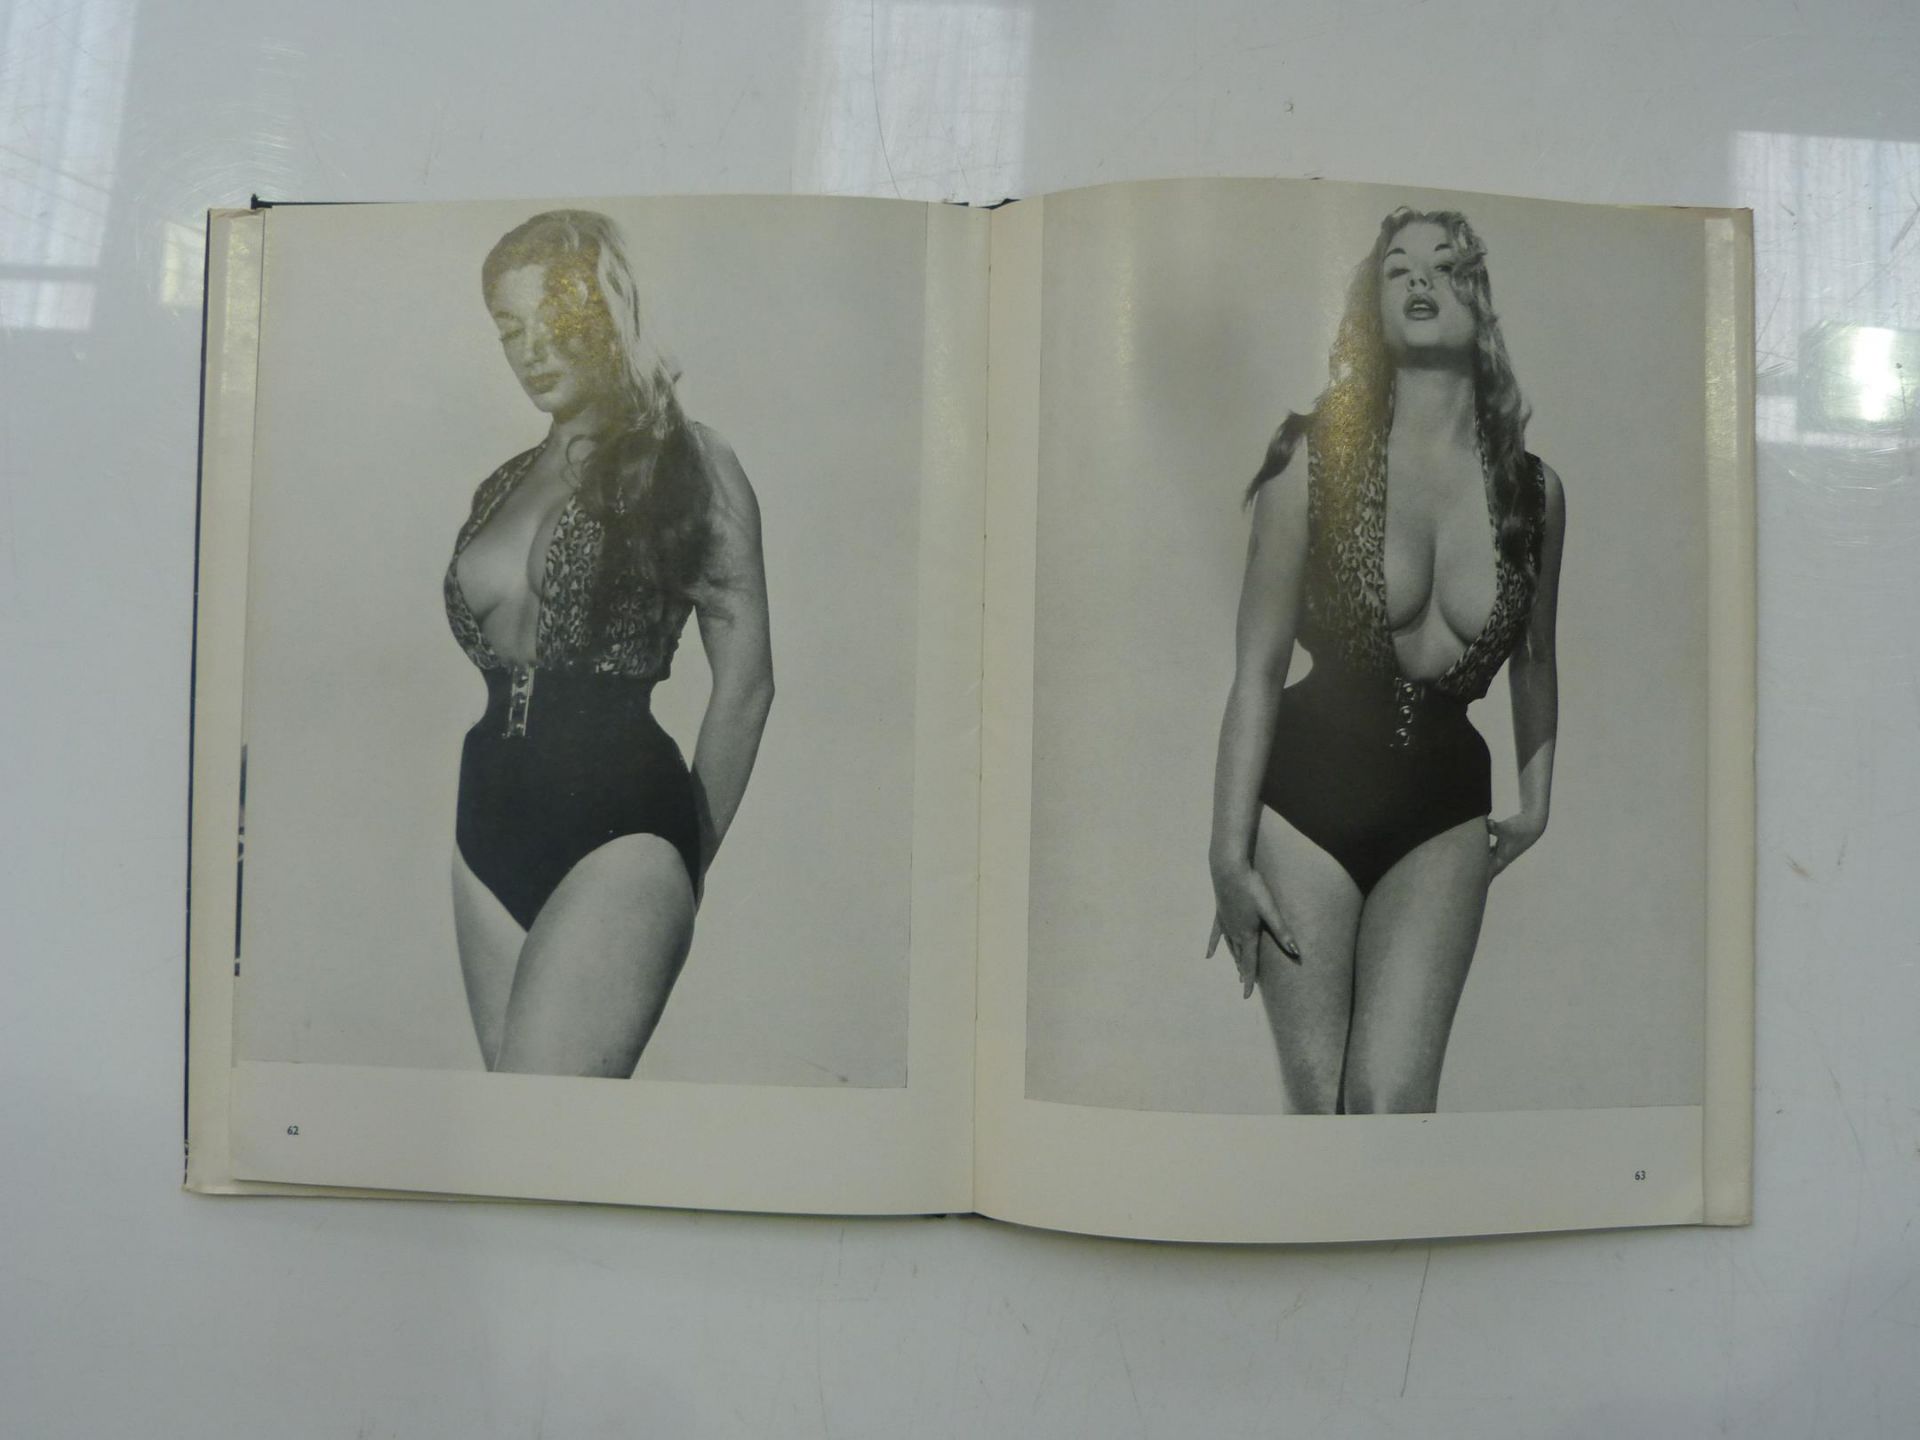 Harrison Marks - 4 various books & 'The Nude' by Andre De Dienes 1956 (est. £30-£50) - Image 11 of 14